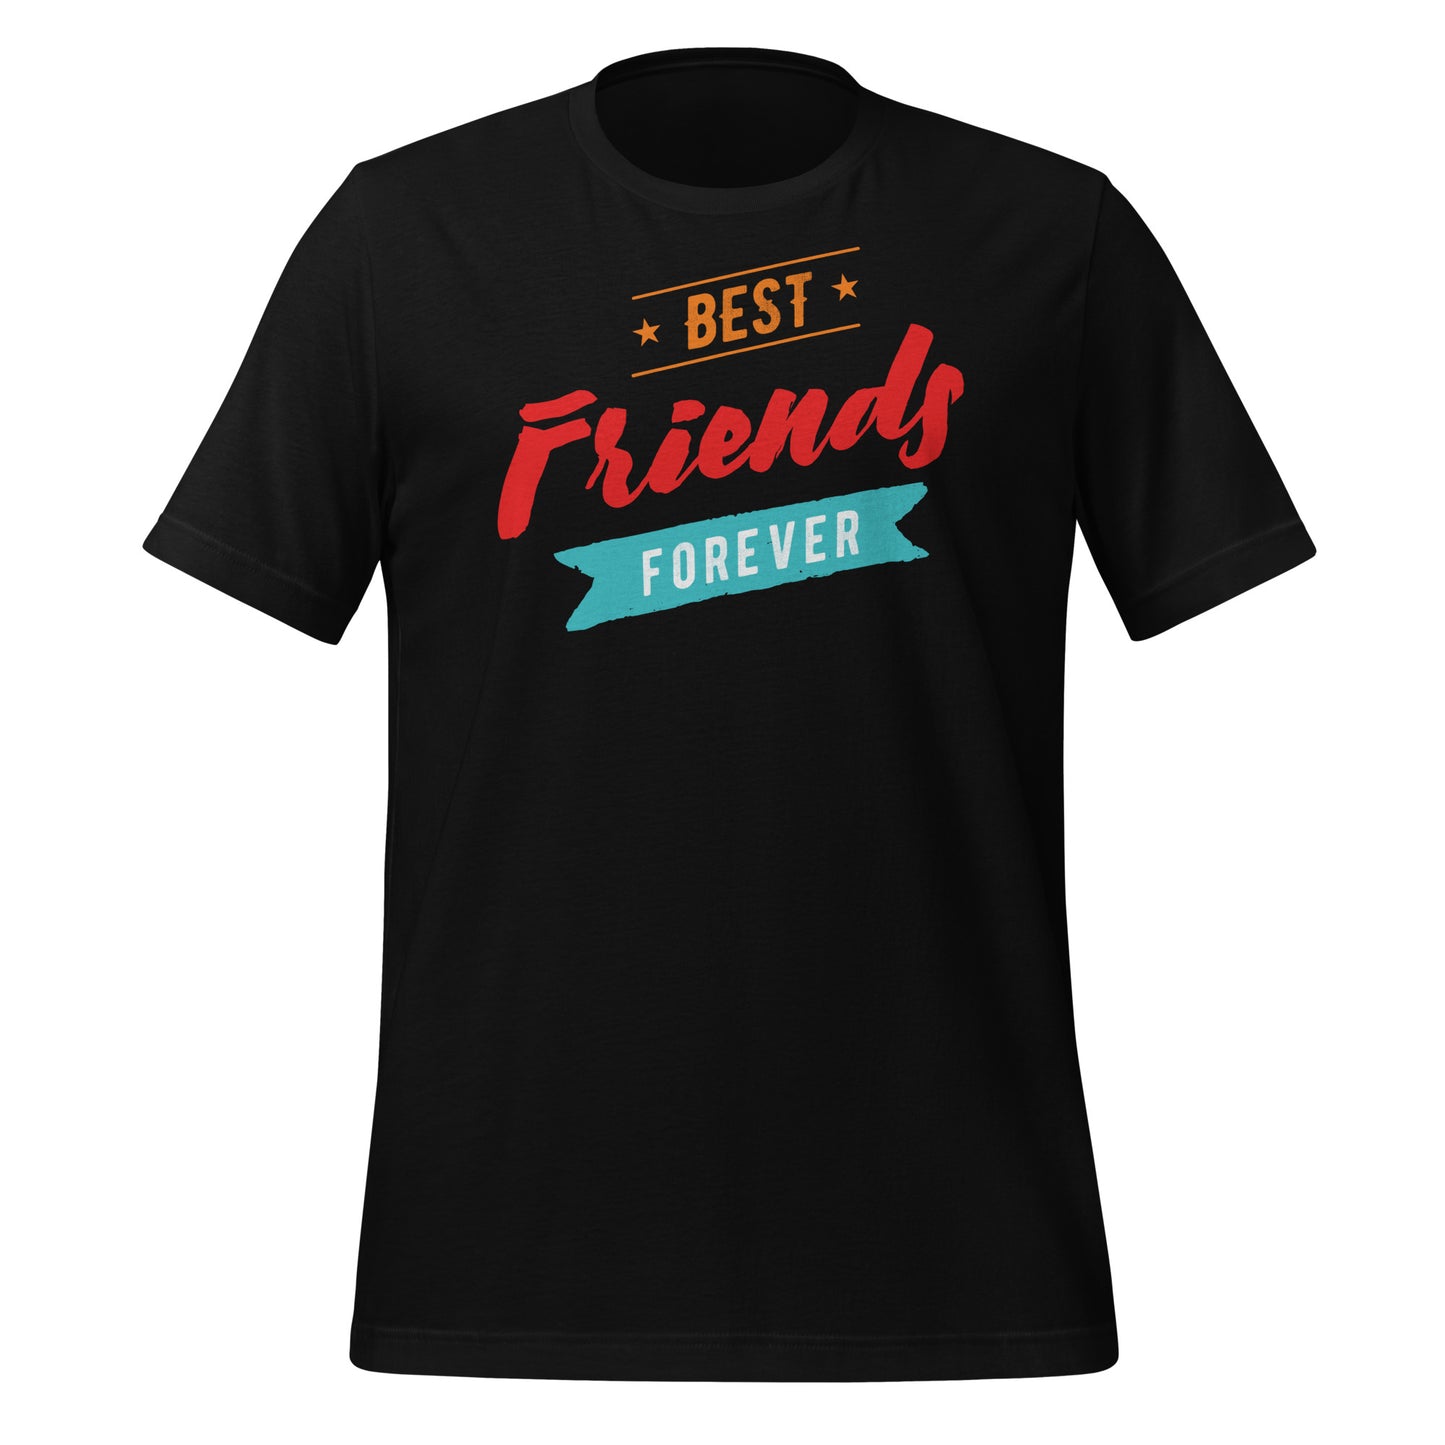 Best Friends Forever: Comfy & Stylish T-Shirt for Unbreakable Bonds